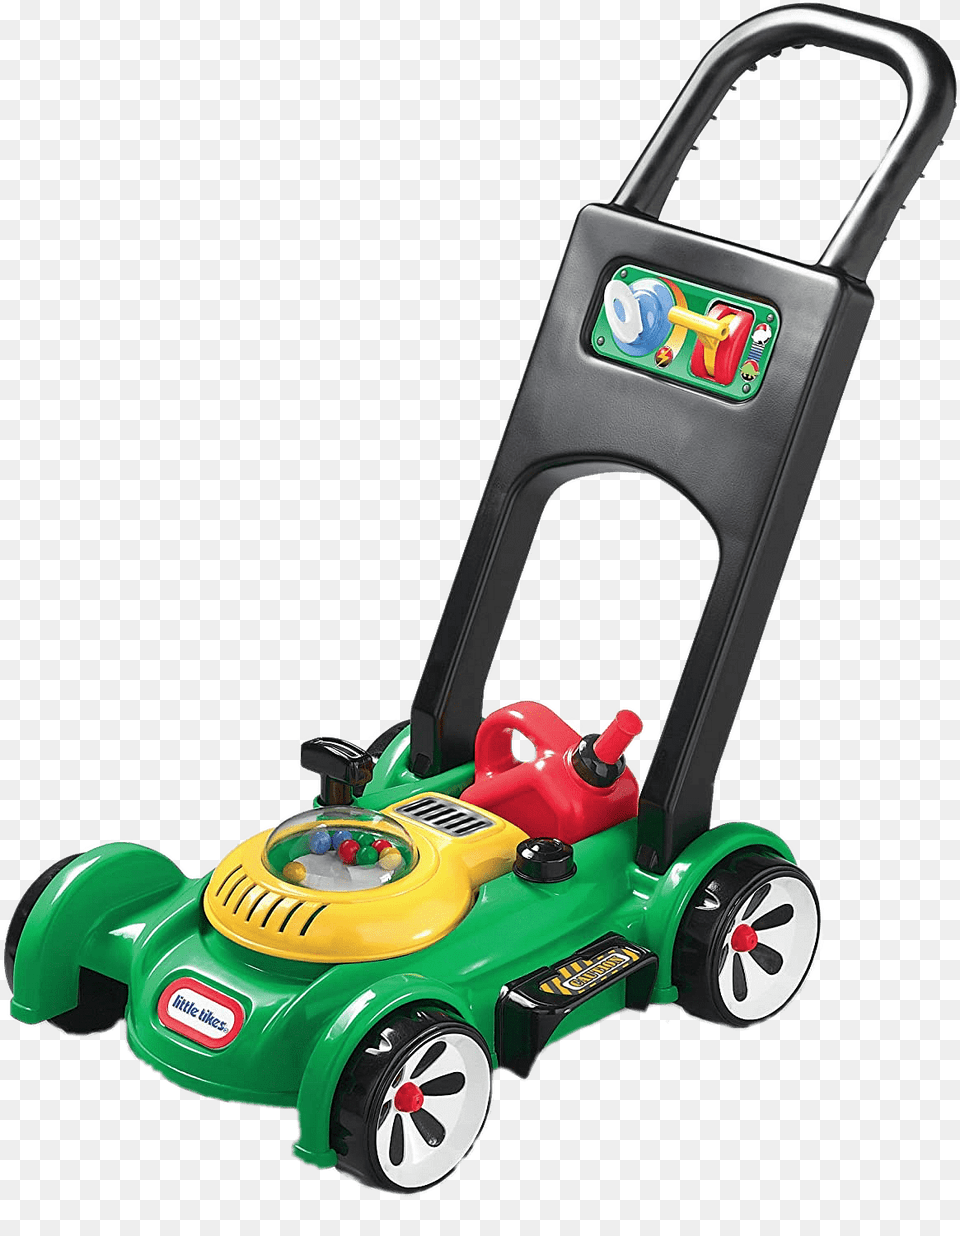 Little Tikes Toy Lawn Mower, Grass, Plant, Device, Lawn Mower Png Image